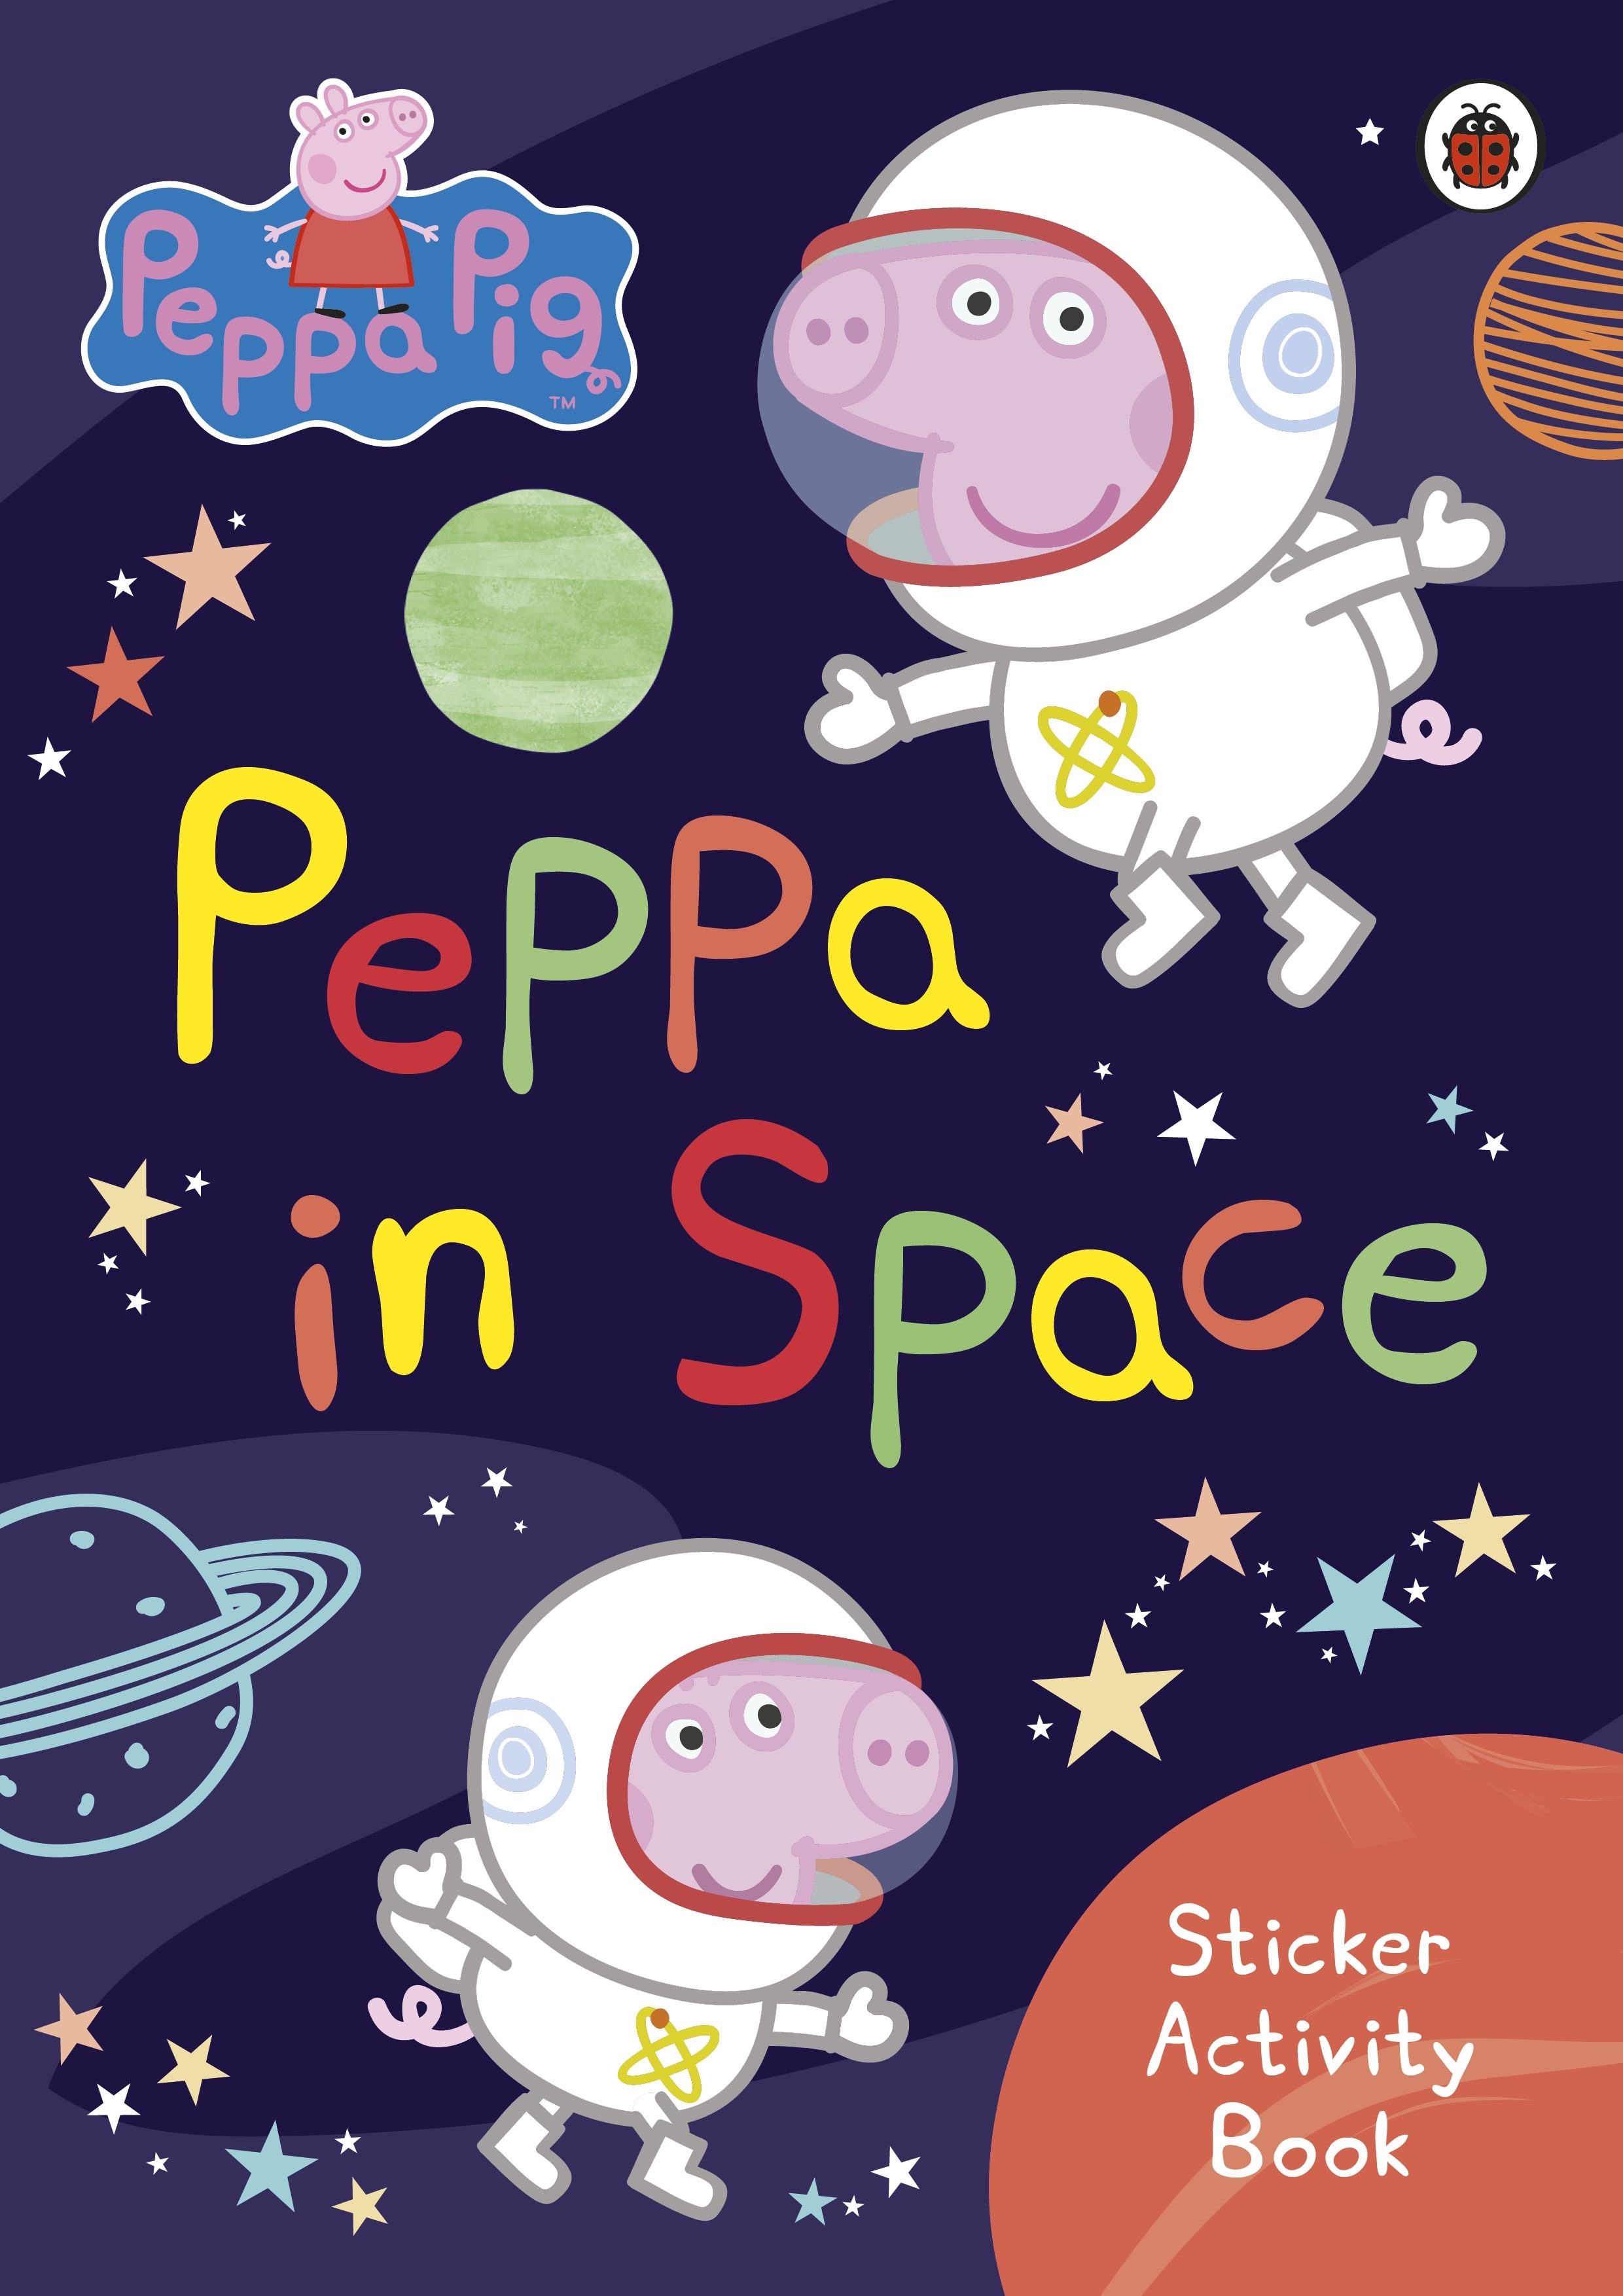 Book “Peppa Pig: Peppa in Space Sticker Activity Book” by Peppa Pig — April 14, 2022